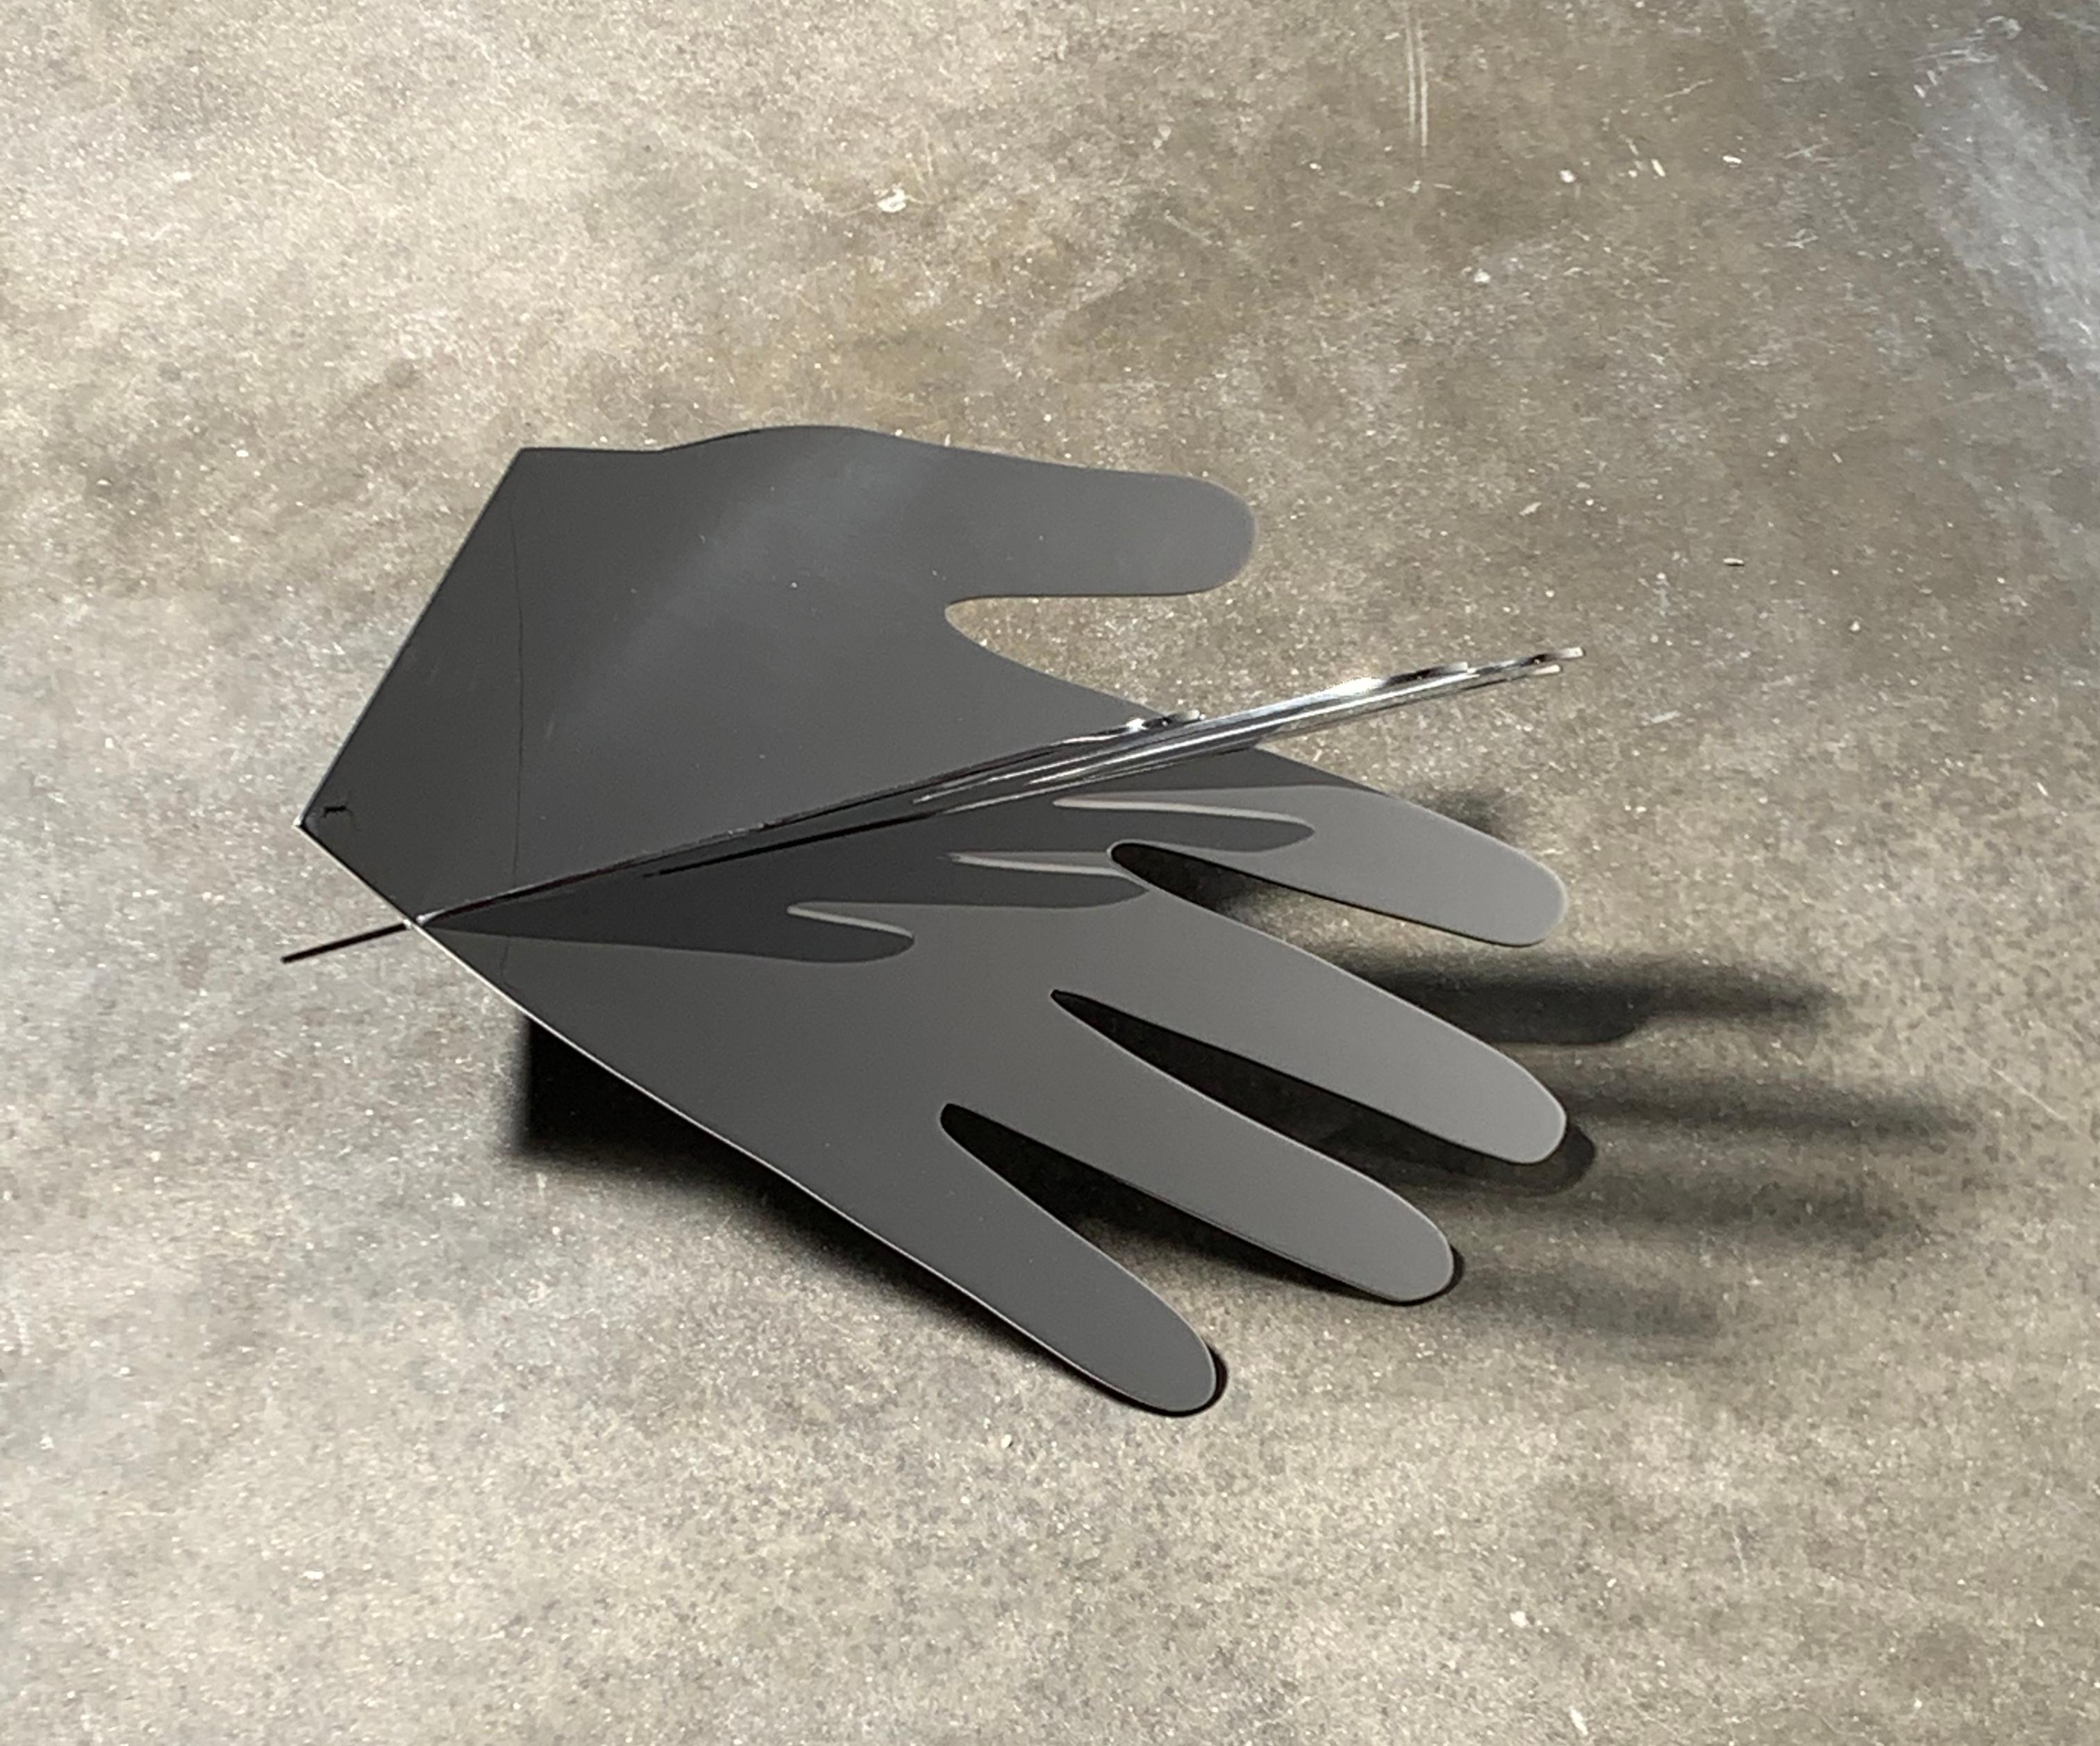 North American Hands 'D' by Shana Lutker, Stainless Steel, Sculpture, 2017 For Sale